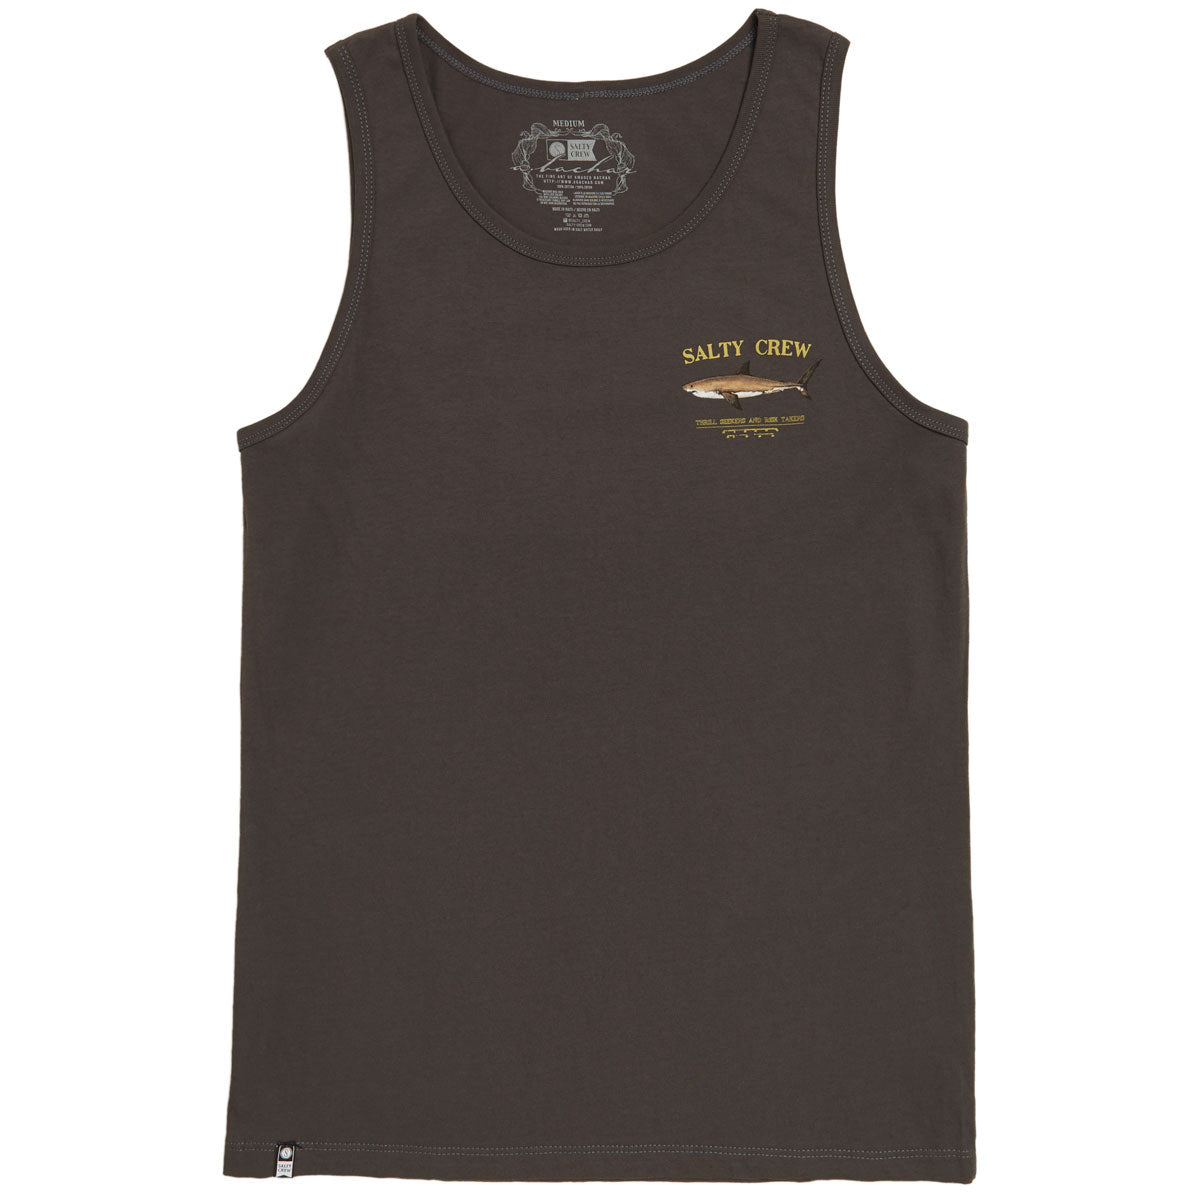 Salty Crew Bruce Tank Top - Charcoal image 1